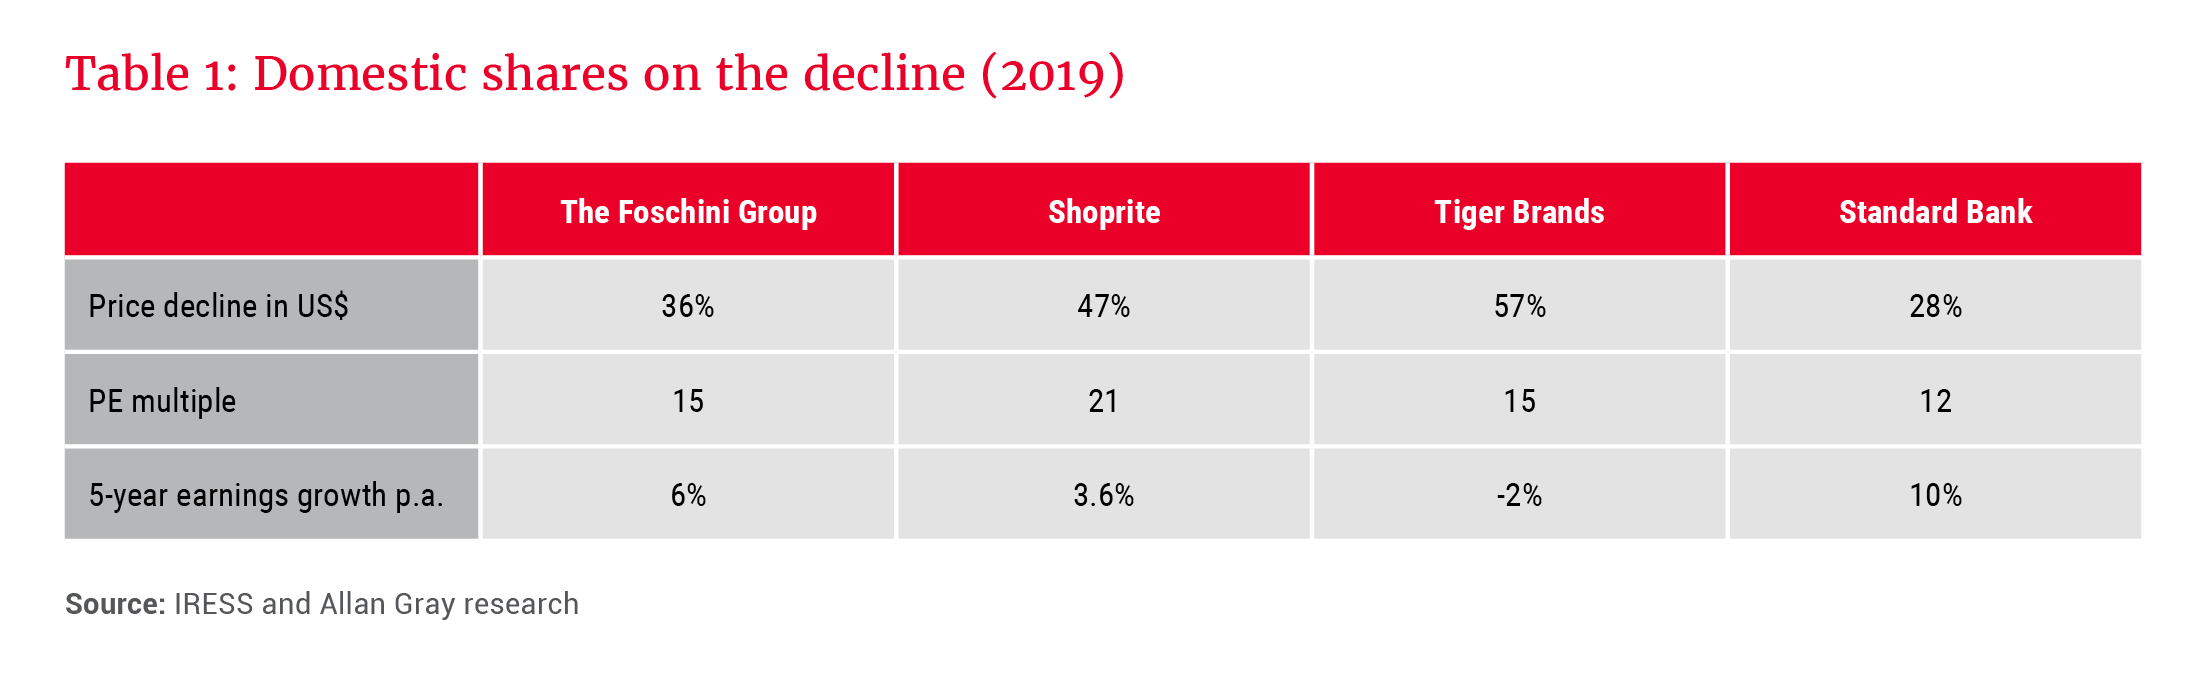 Domestic shares on the decline (2019) - Allan Gray